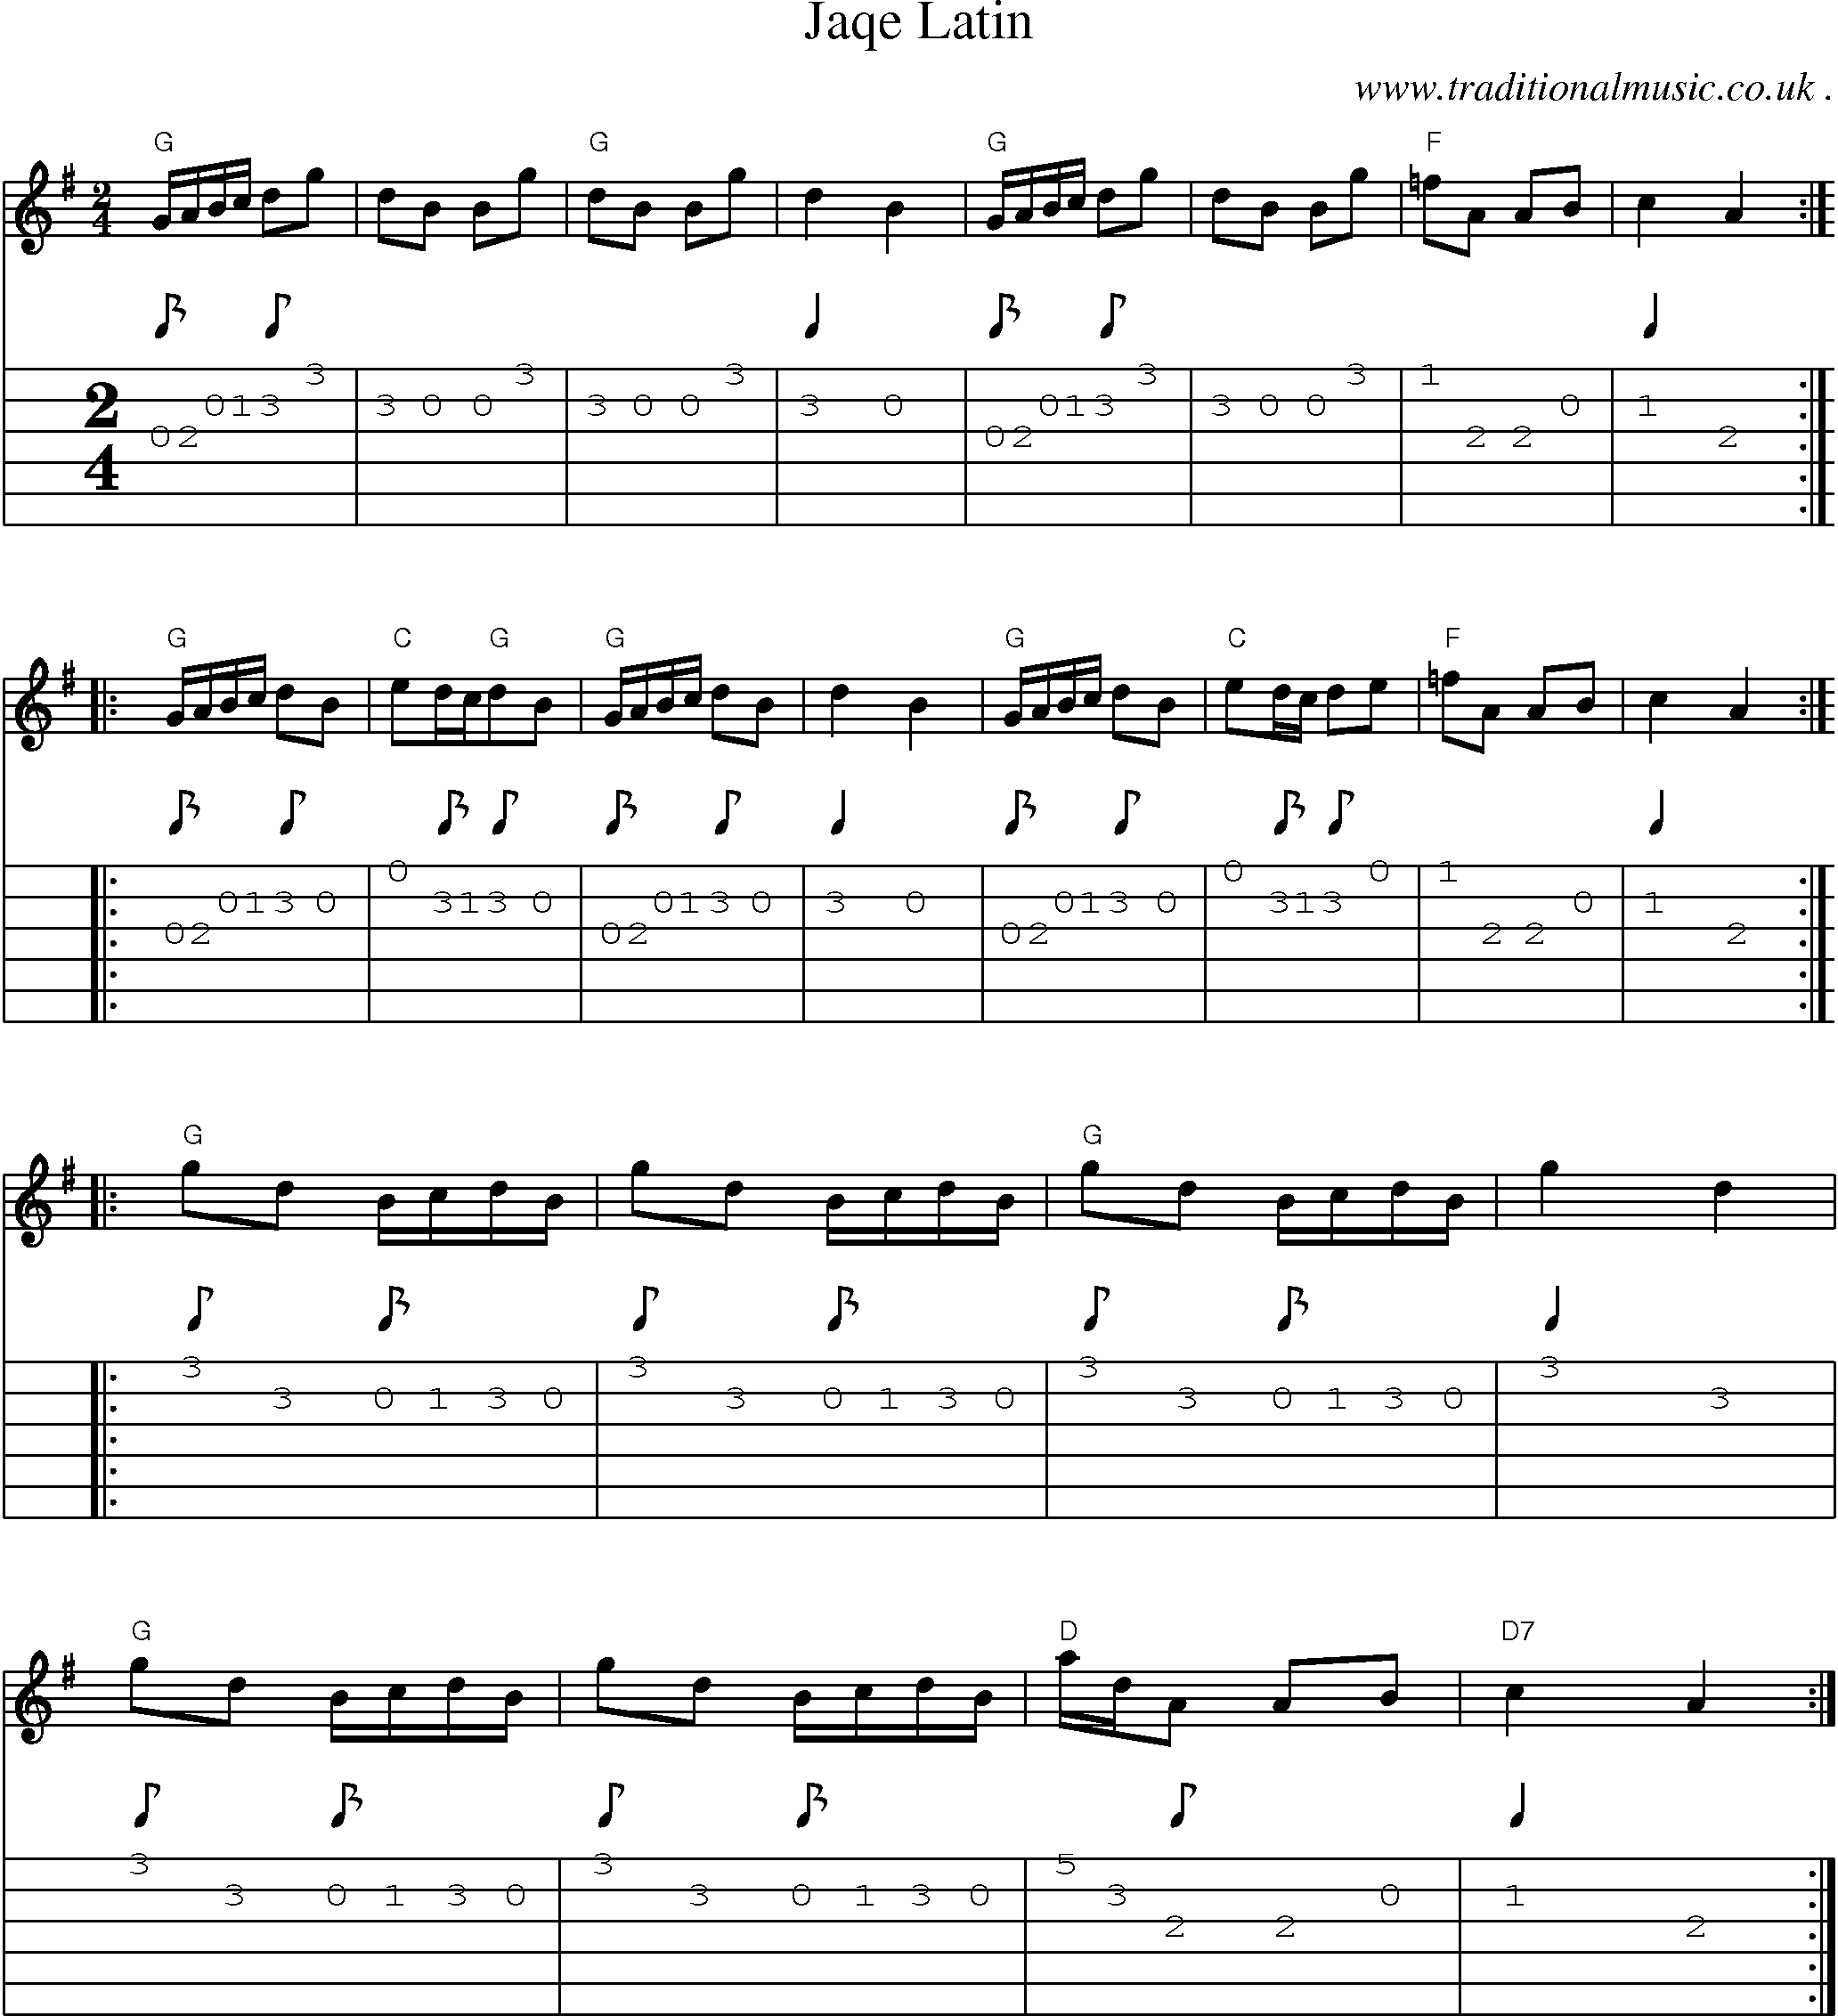 Sheet-Music and Guitar Tabs for Jaqe Latin